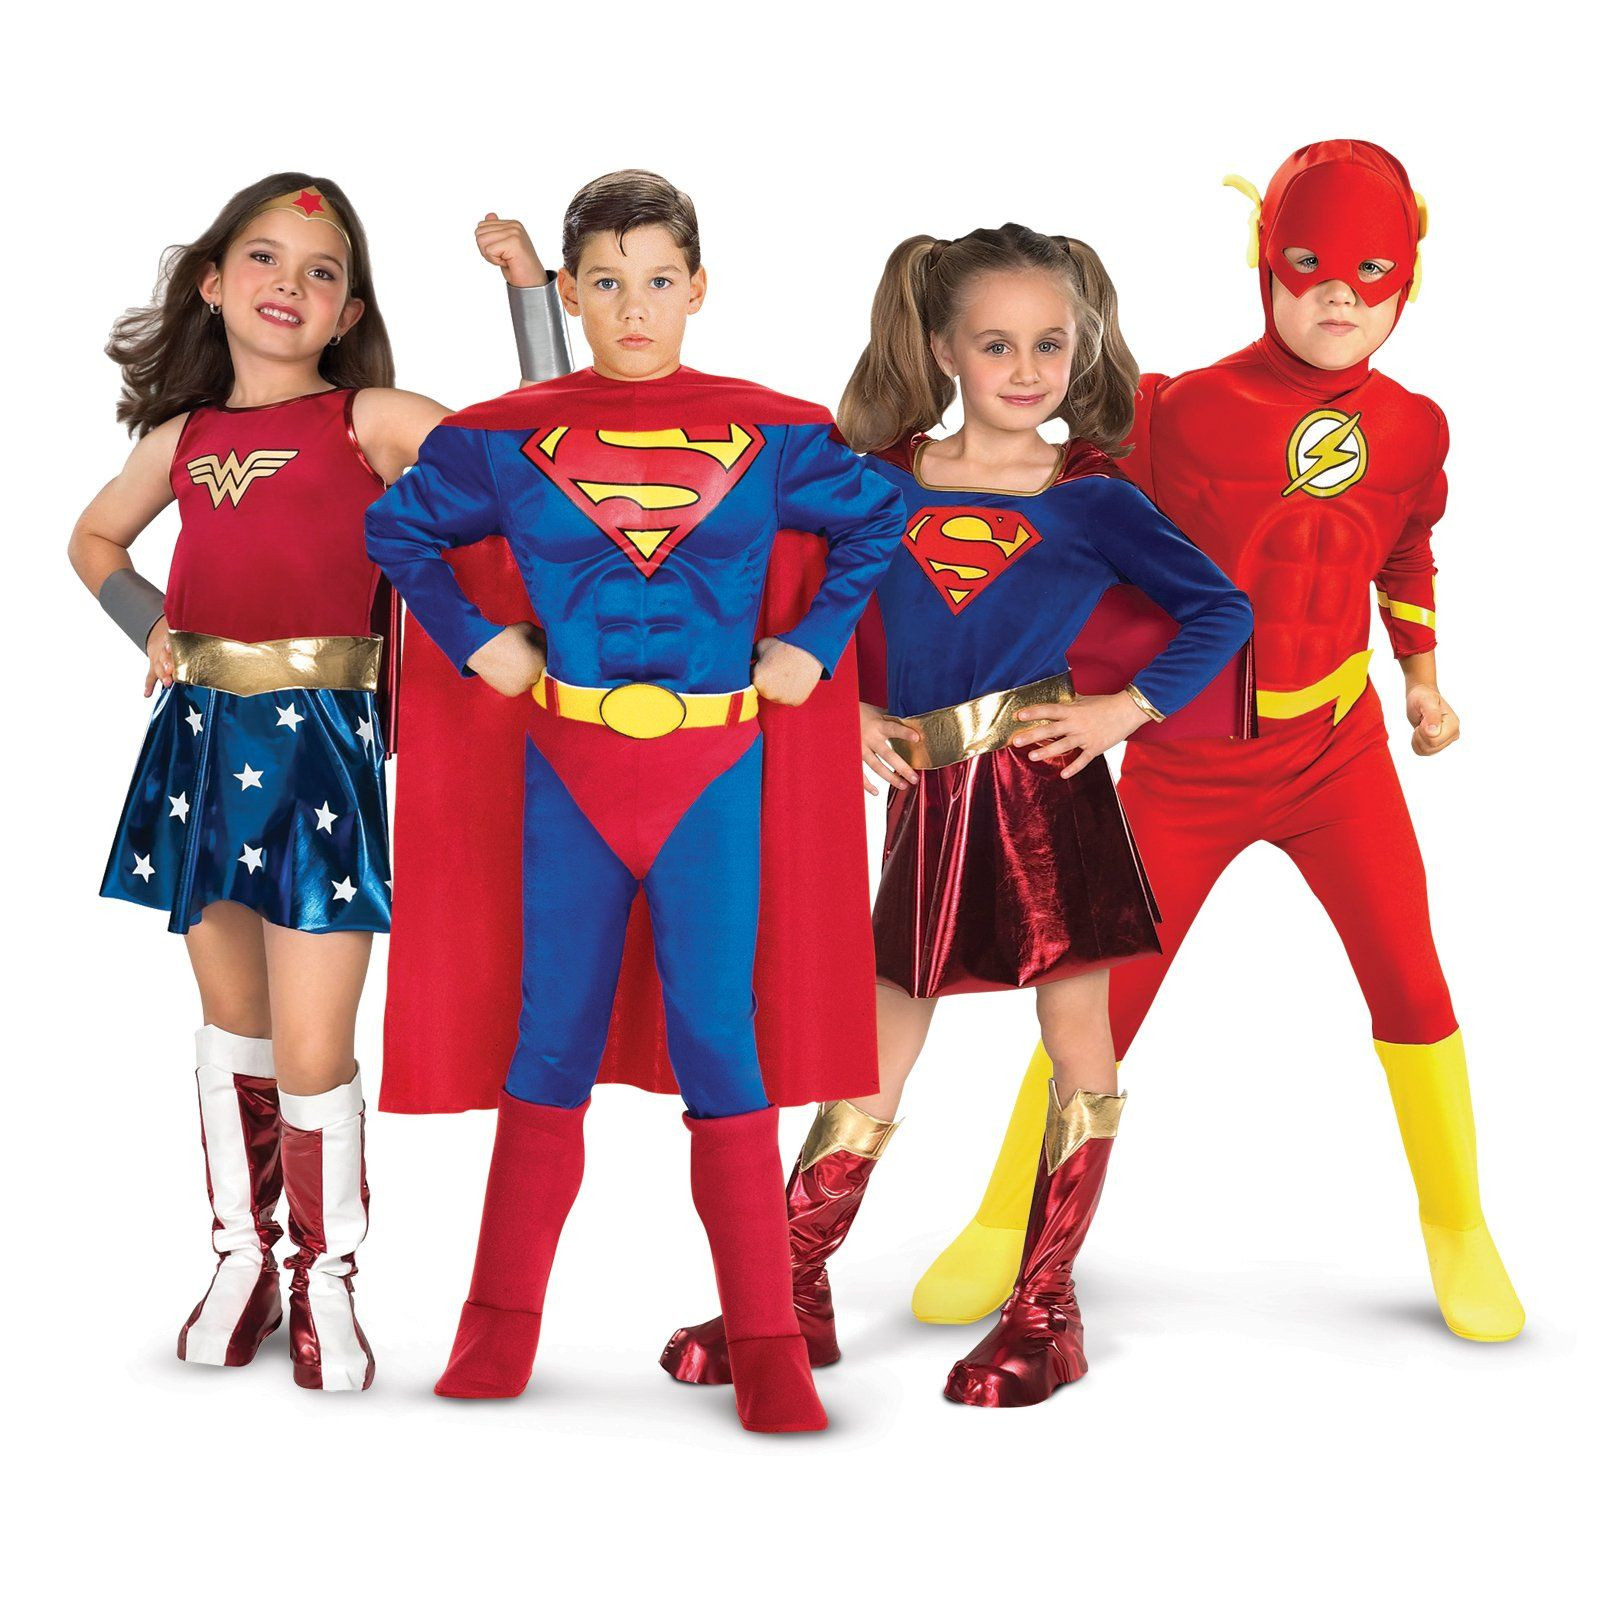 Kids Dress Up Party
 Invite all the kids to e dressed up as their favorite